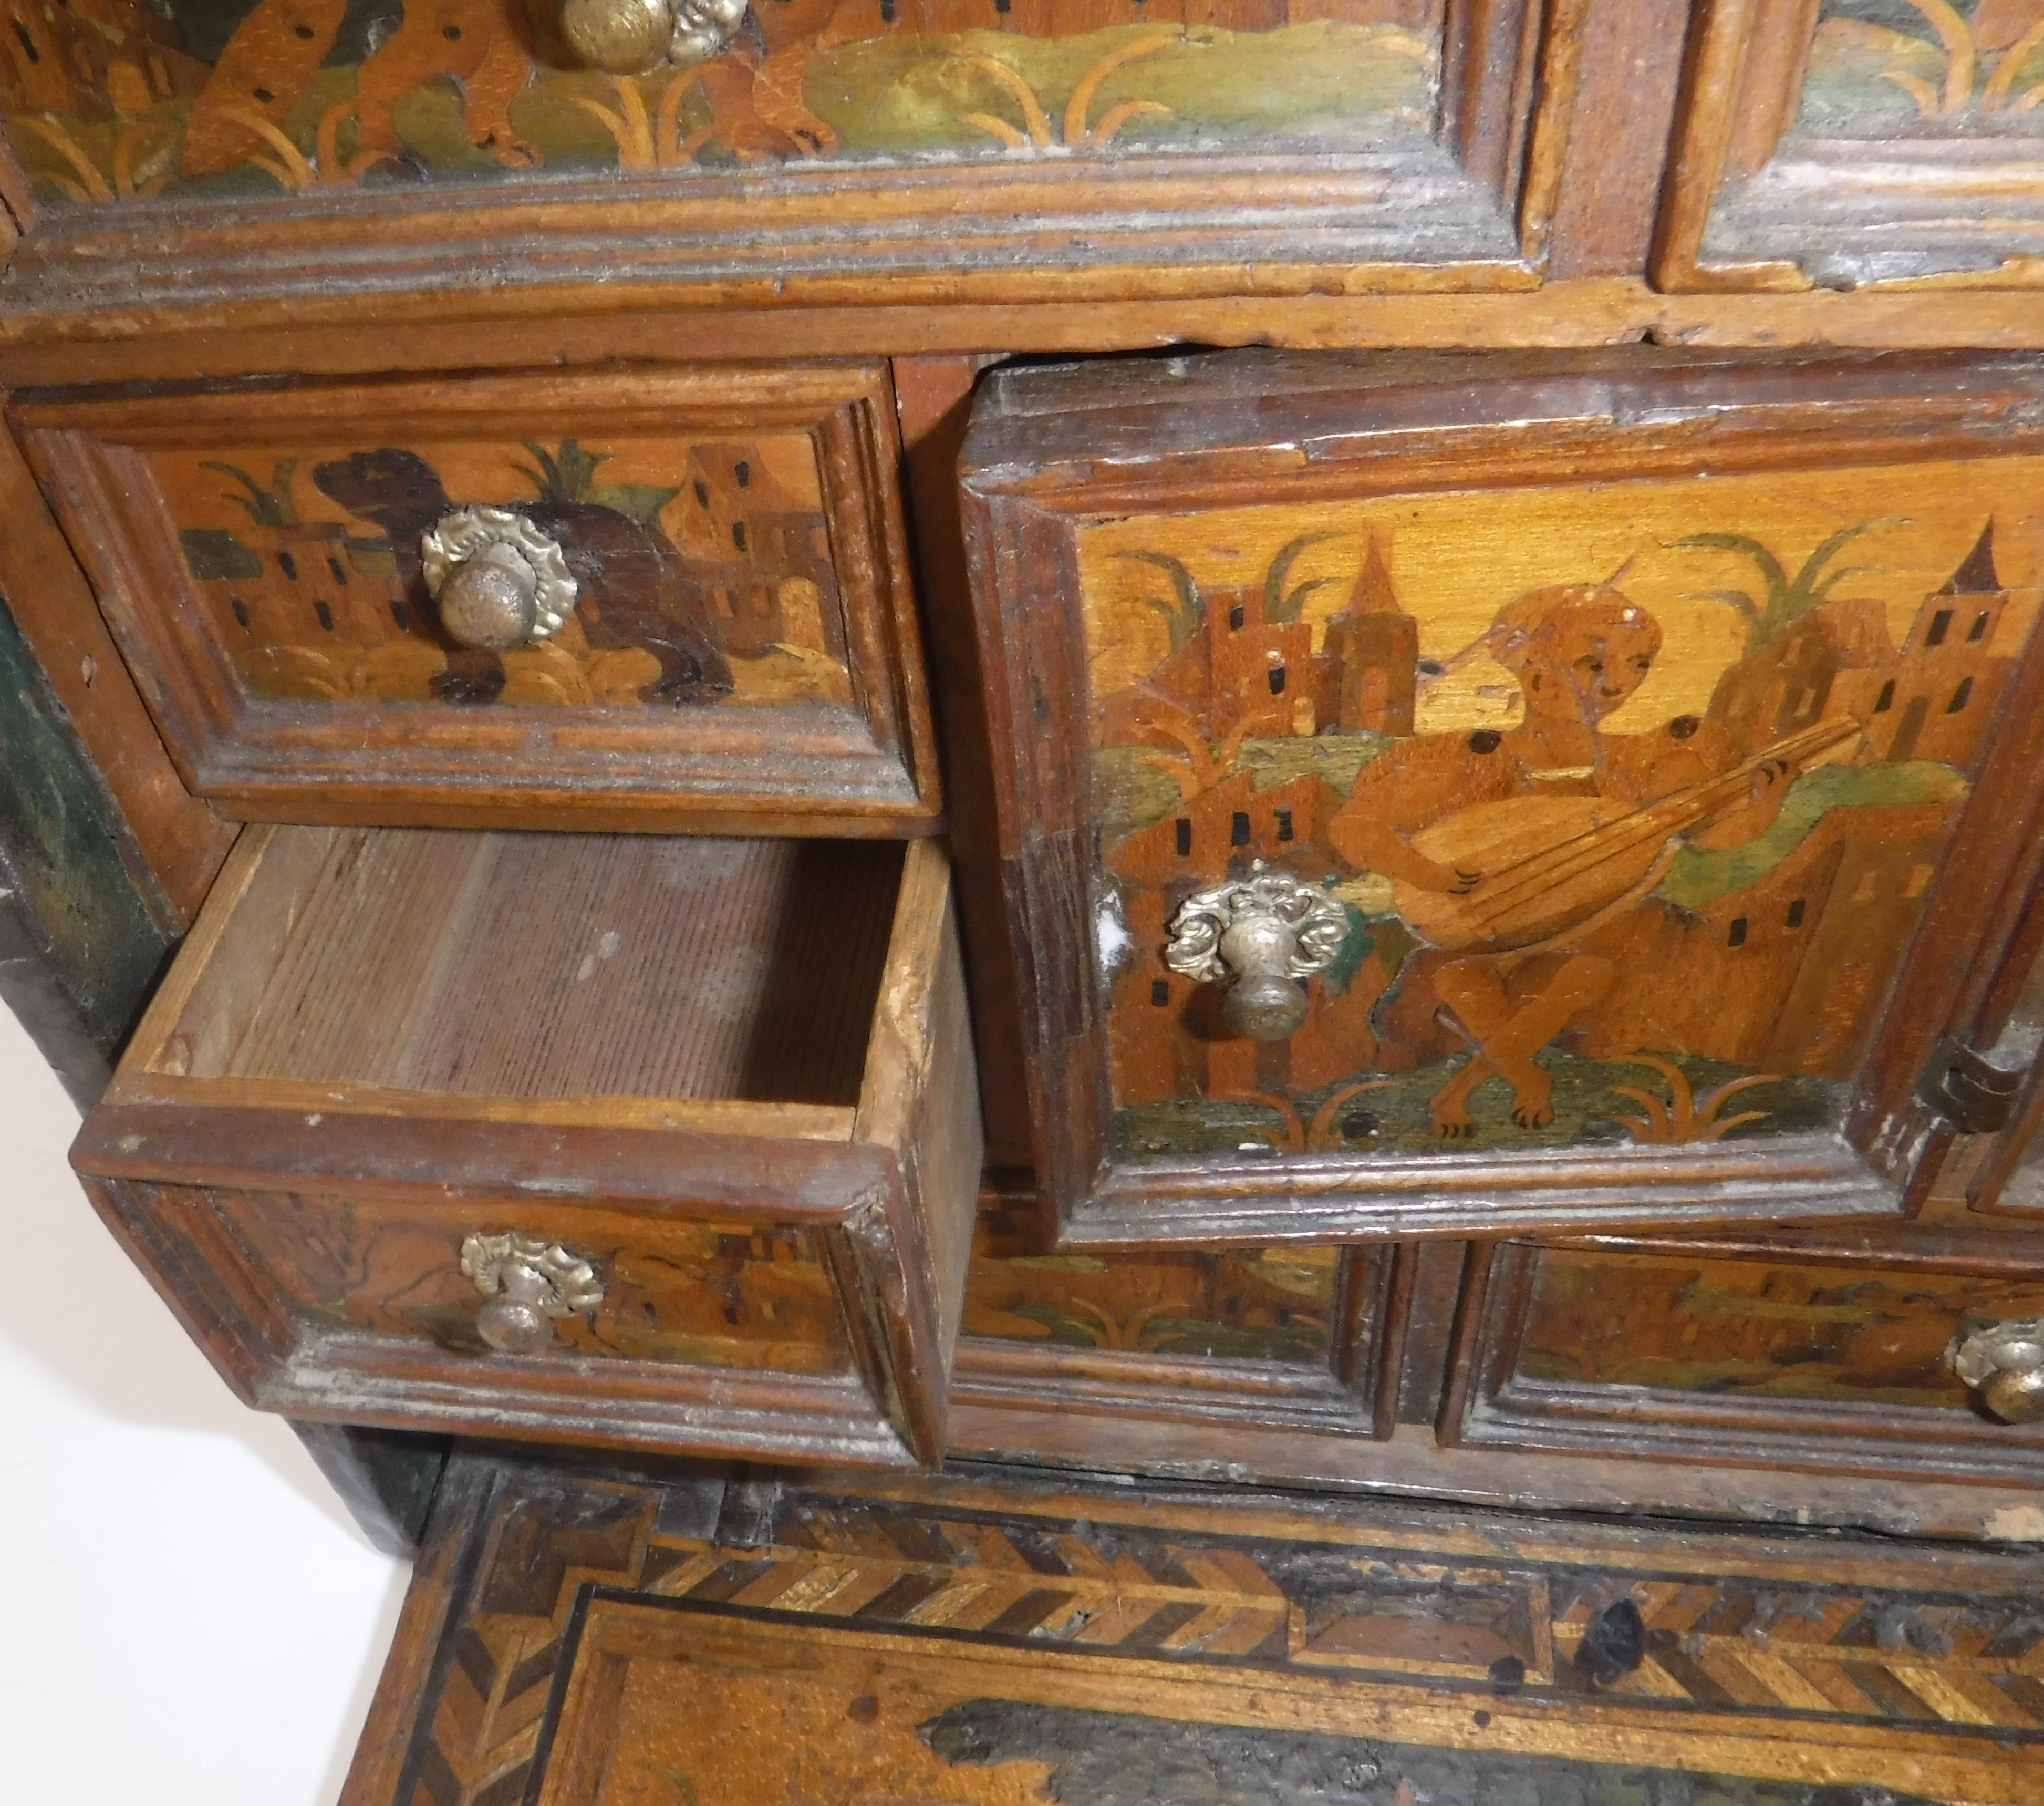 A 17th Century Augsburg table-top or tra - Image 12 of 42